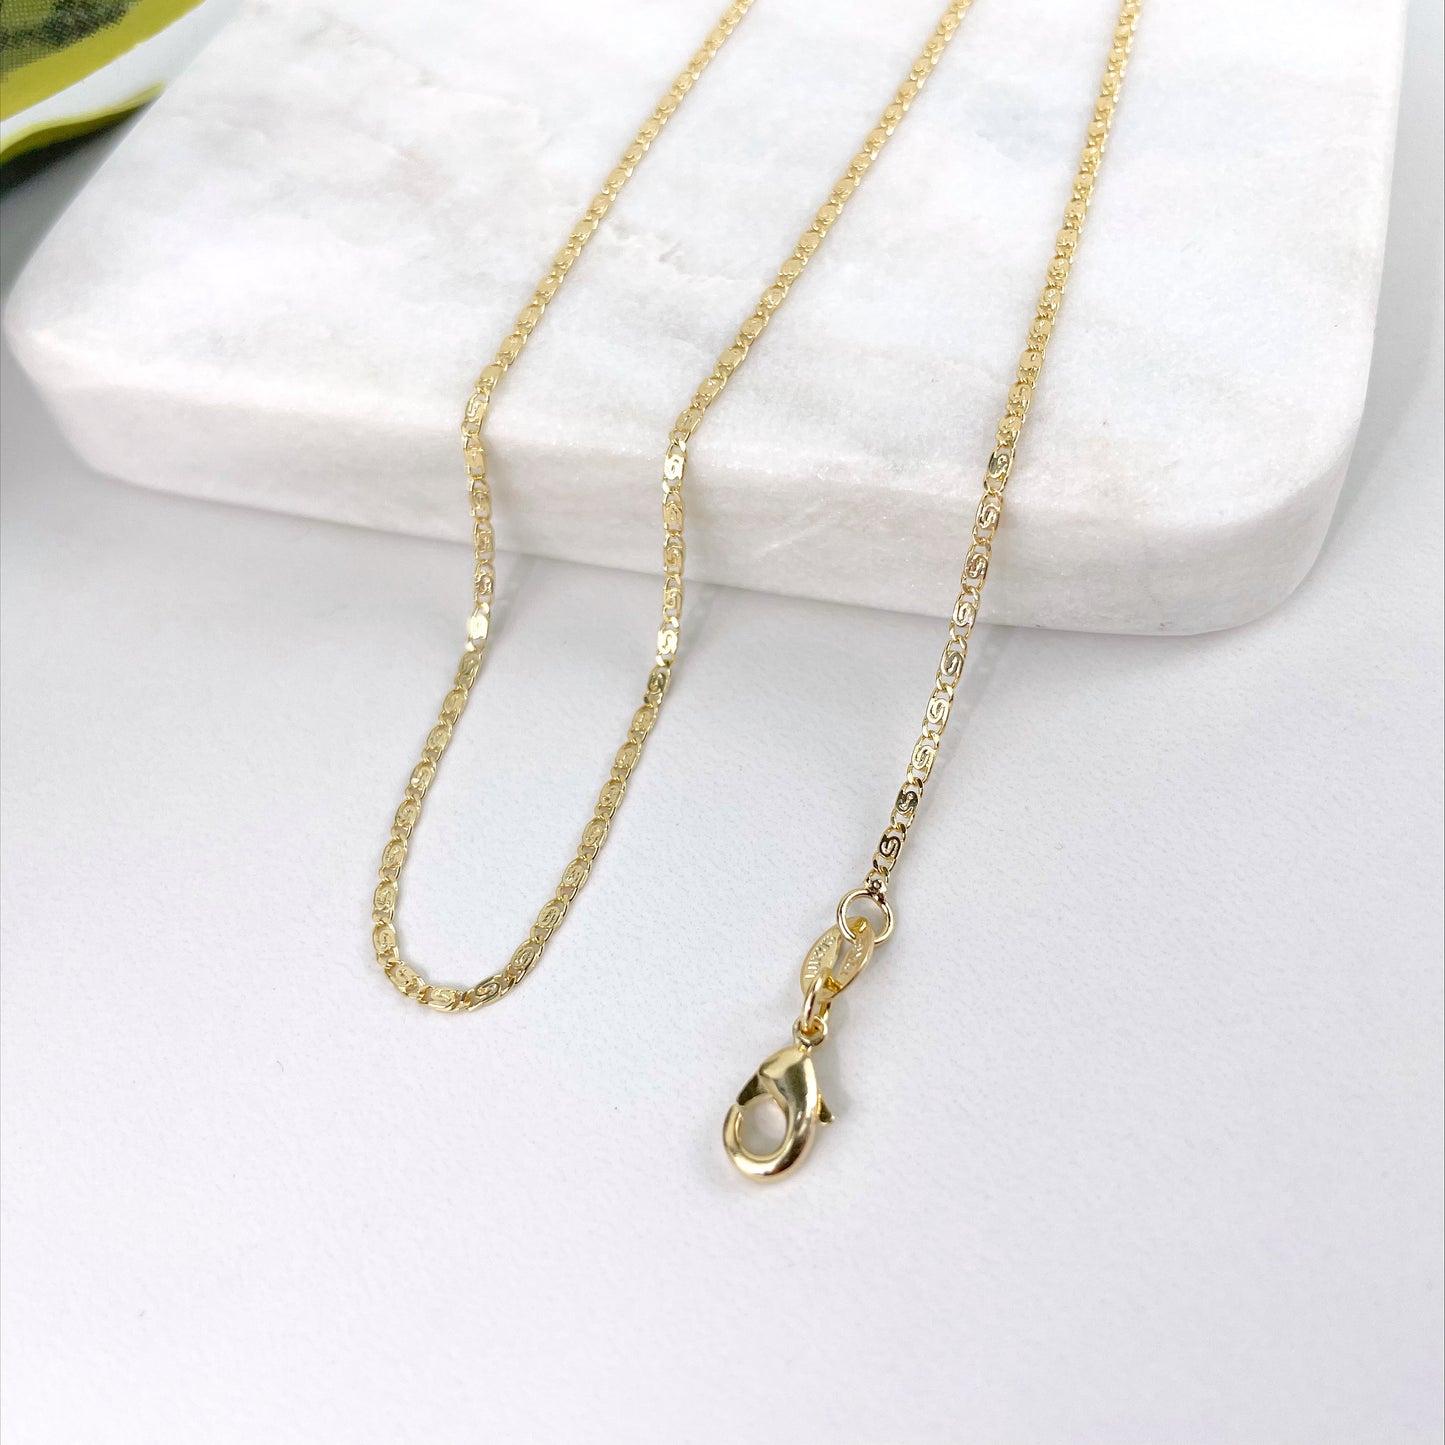 18k Gold Filled 1.5 mm Mariner Anchor Link Chain, Dainty Chain Necklace Wholesale Jewelry Making Supplies